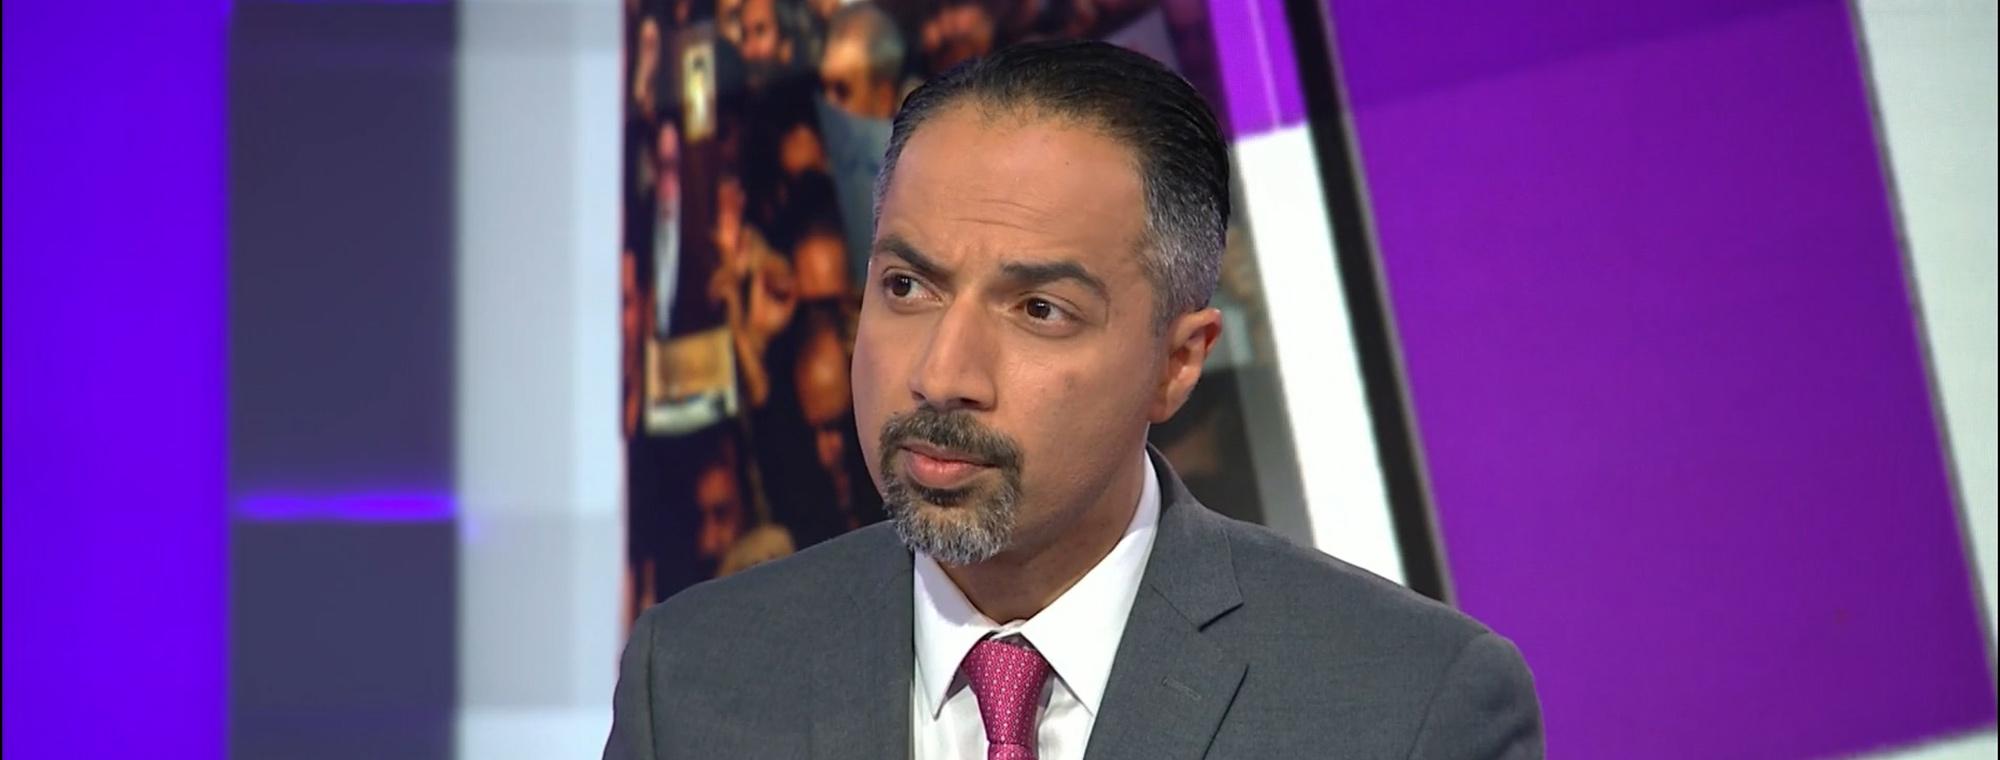 Trita Parsi, executive vice president of the Quincy Institute on CNN